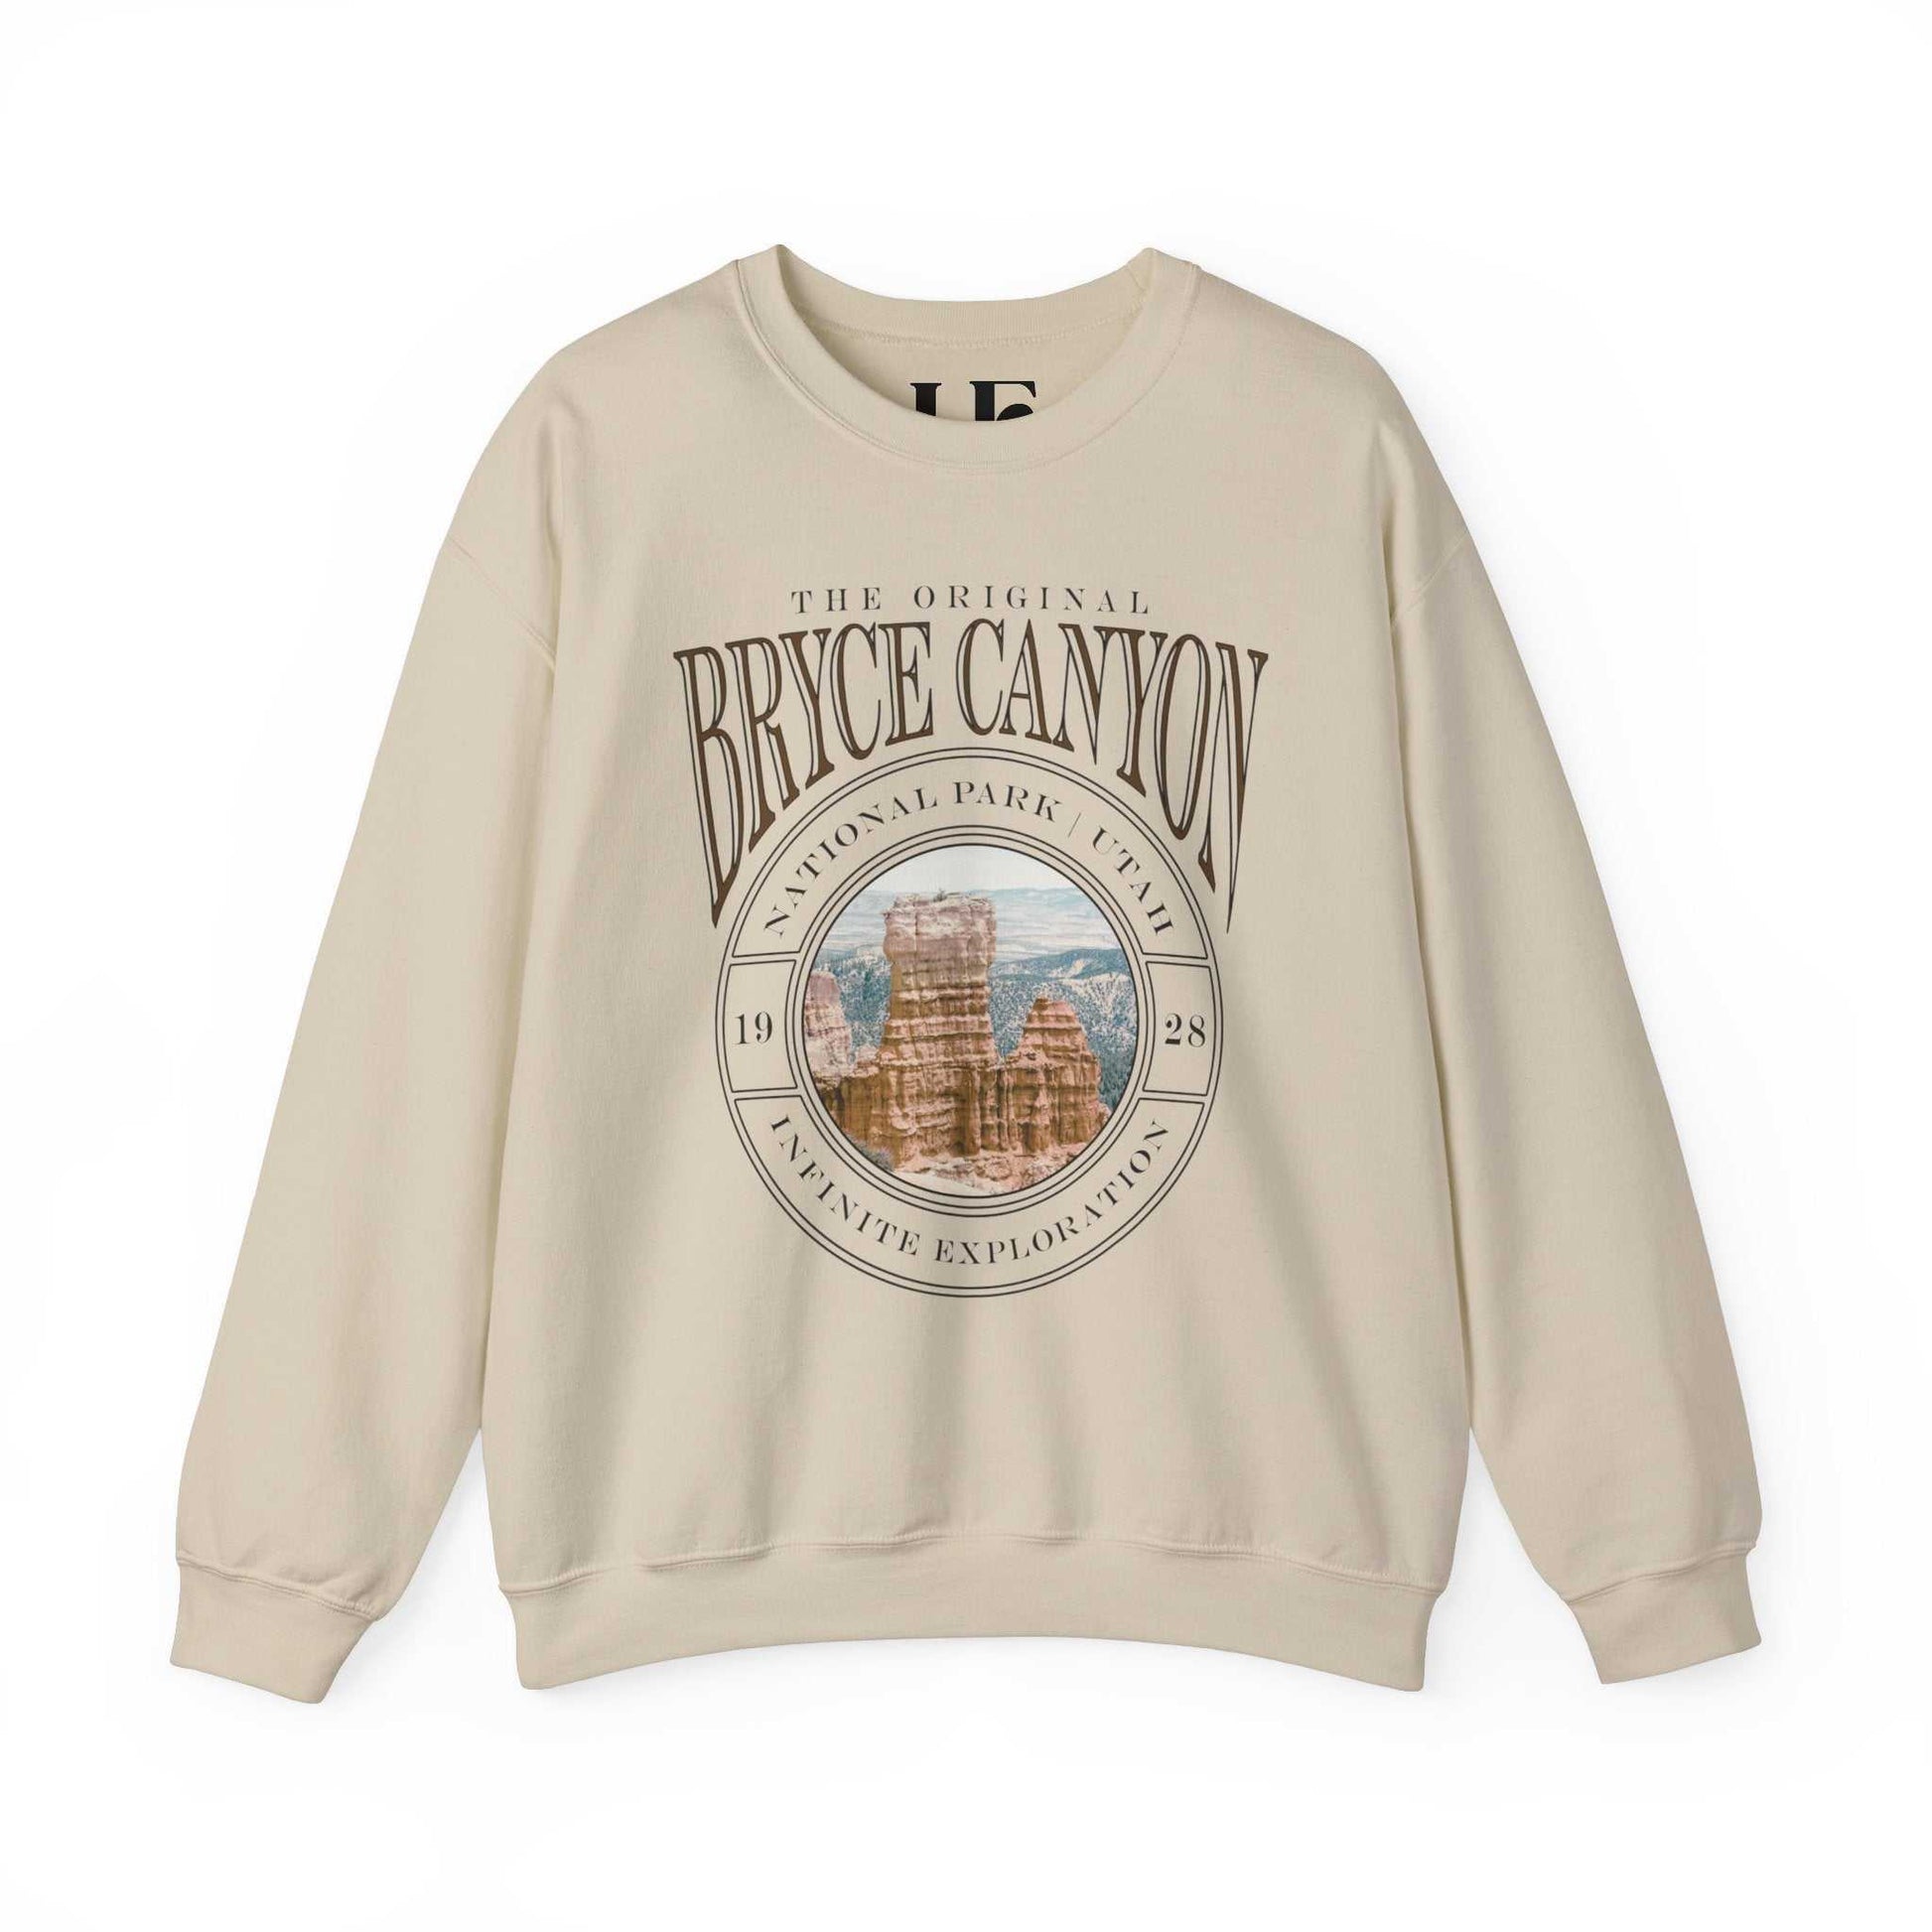 Bryce Canyon SweatshirtA classic Bryce Canyon sweatshirt featuring the the famous hoodoo landscapes. 
Details:
- Medium-heavy fabric for staying cozy - sizing is unisex - Go up two sizes f